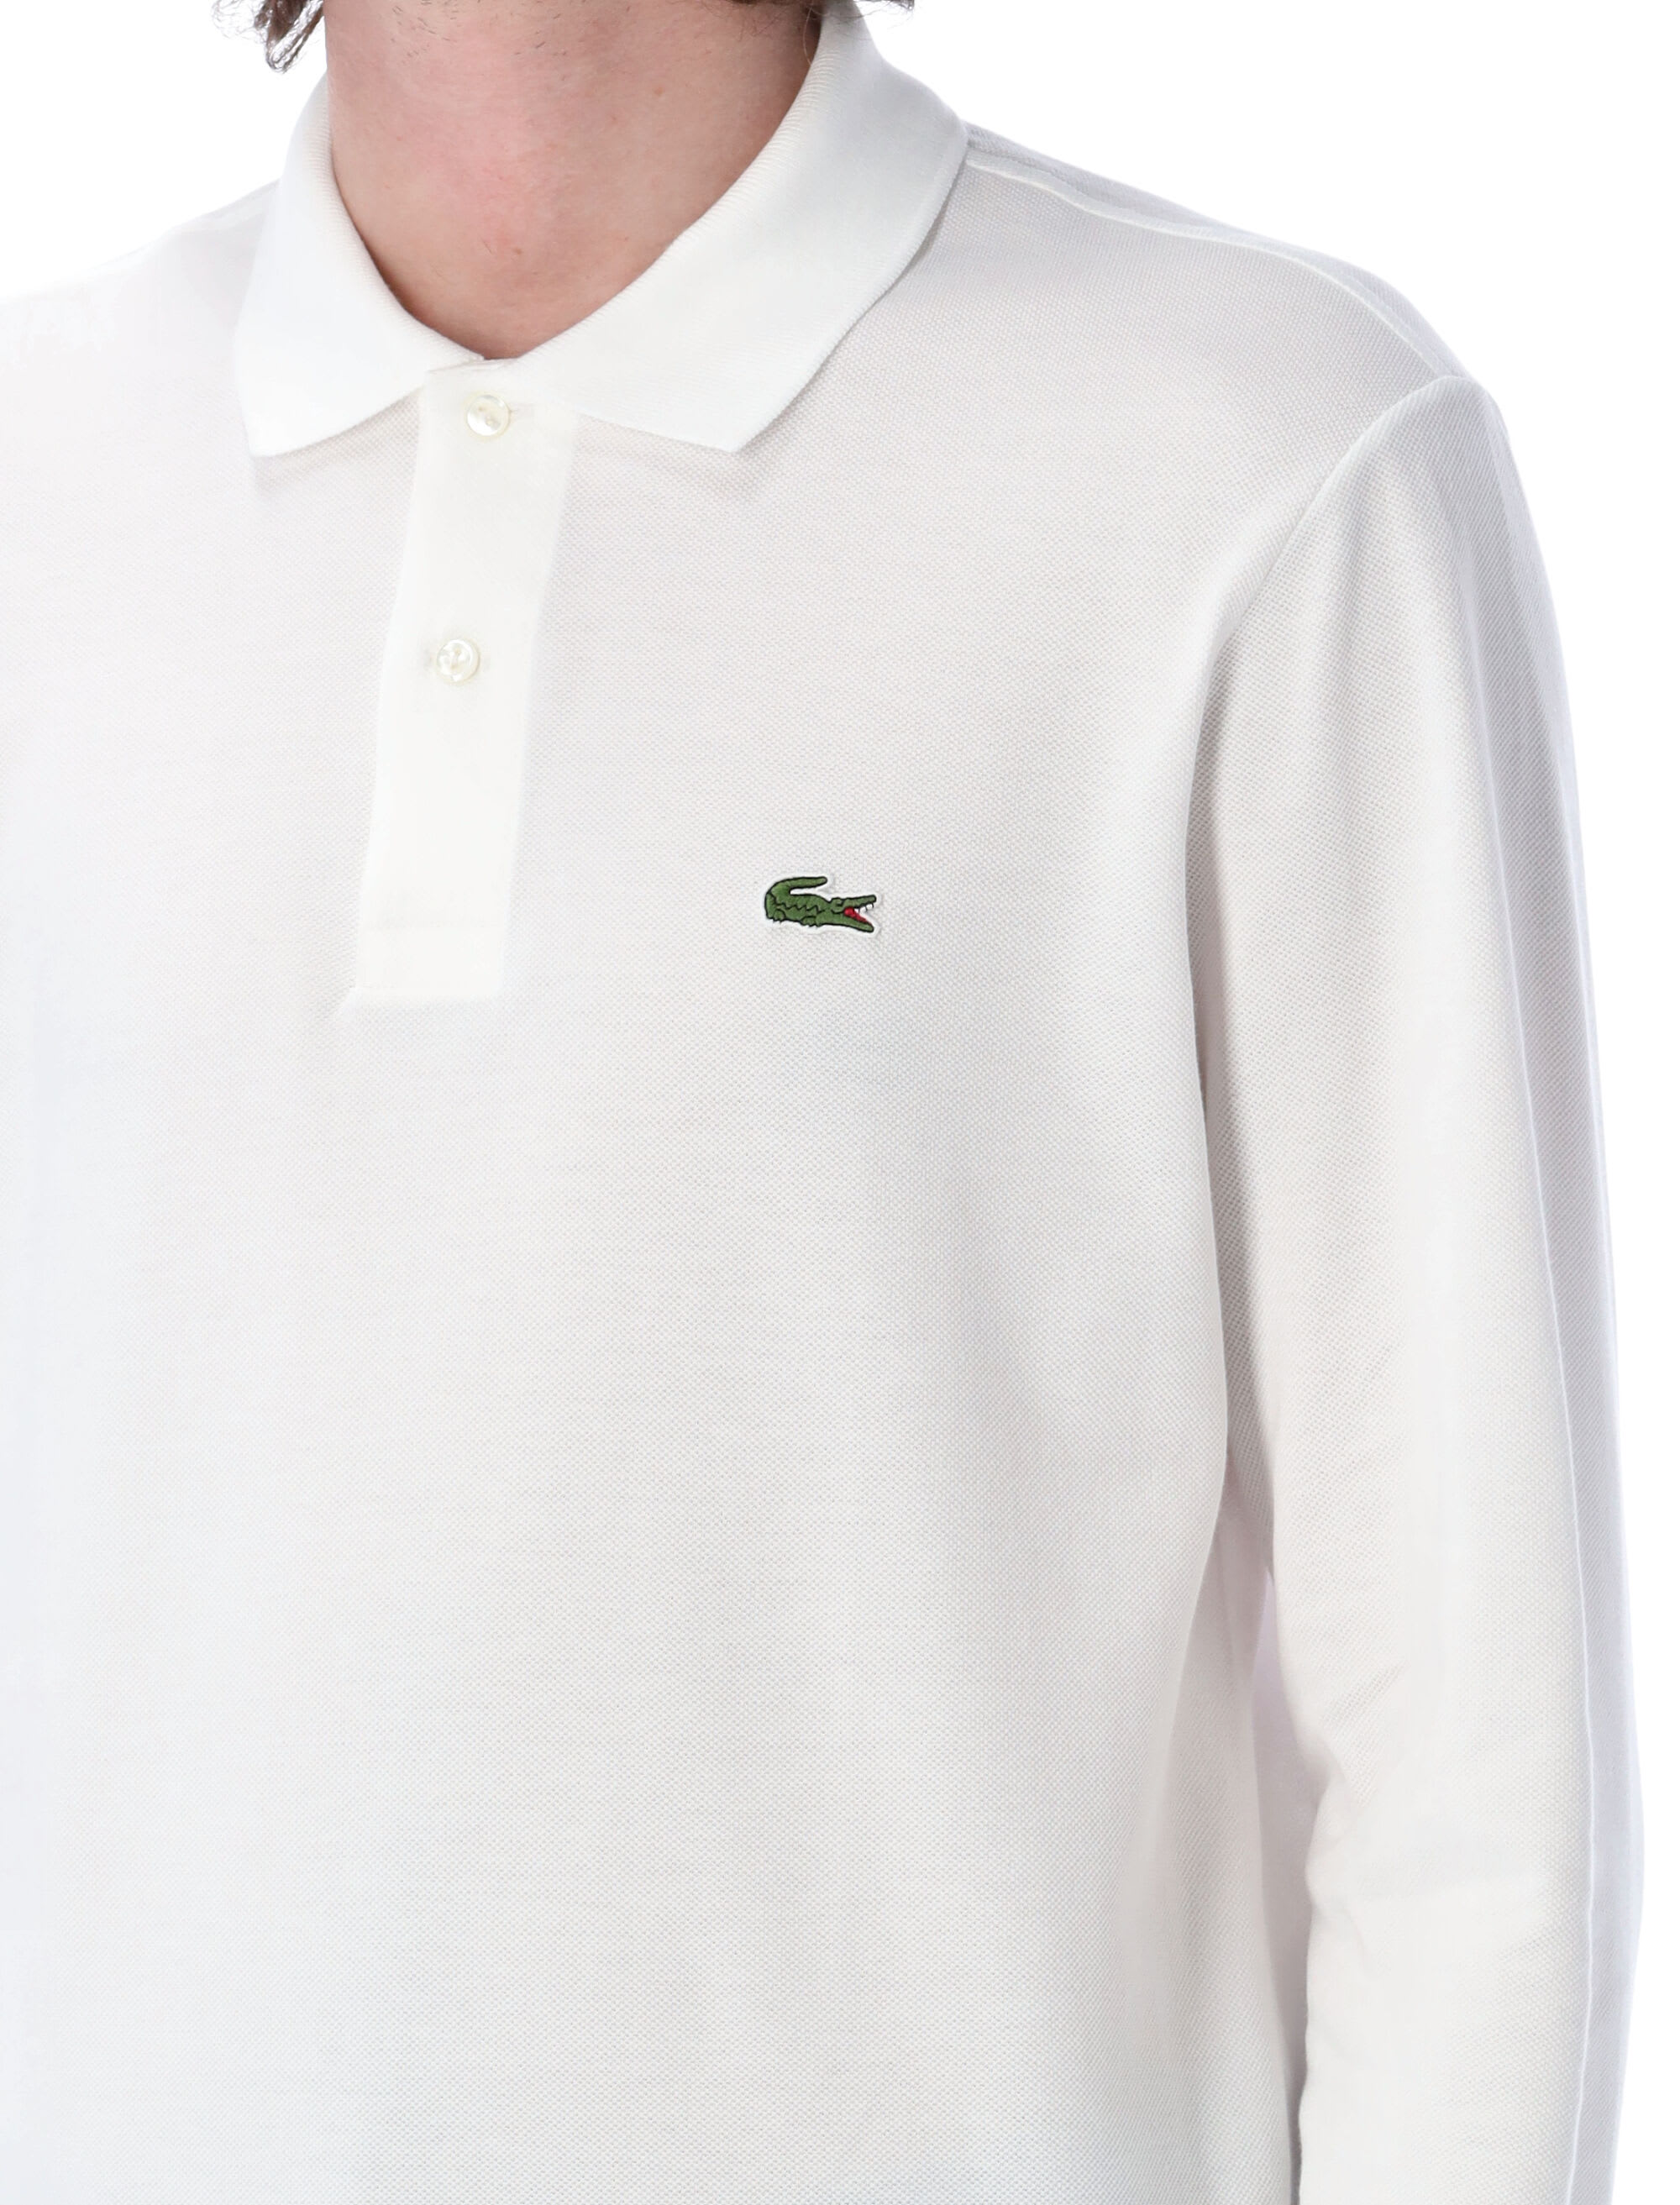 Lacoste Mens' Classic Fit Polo Shirt Olive – Fit & Fly Sportswear